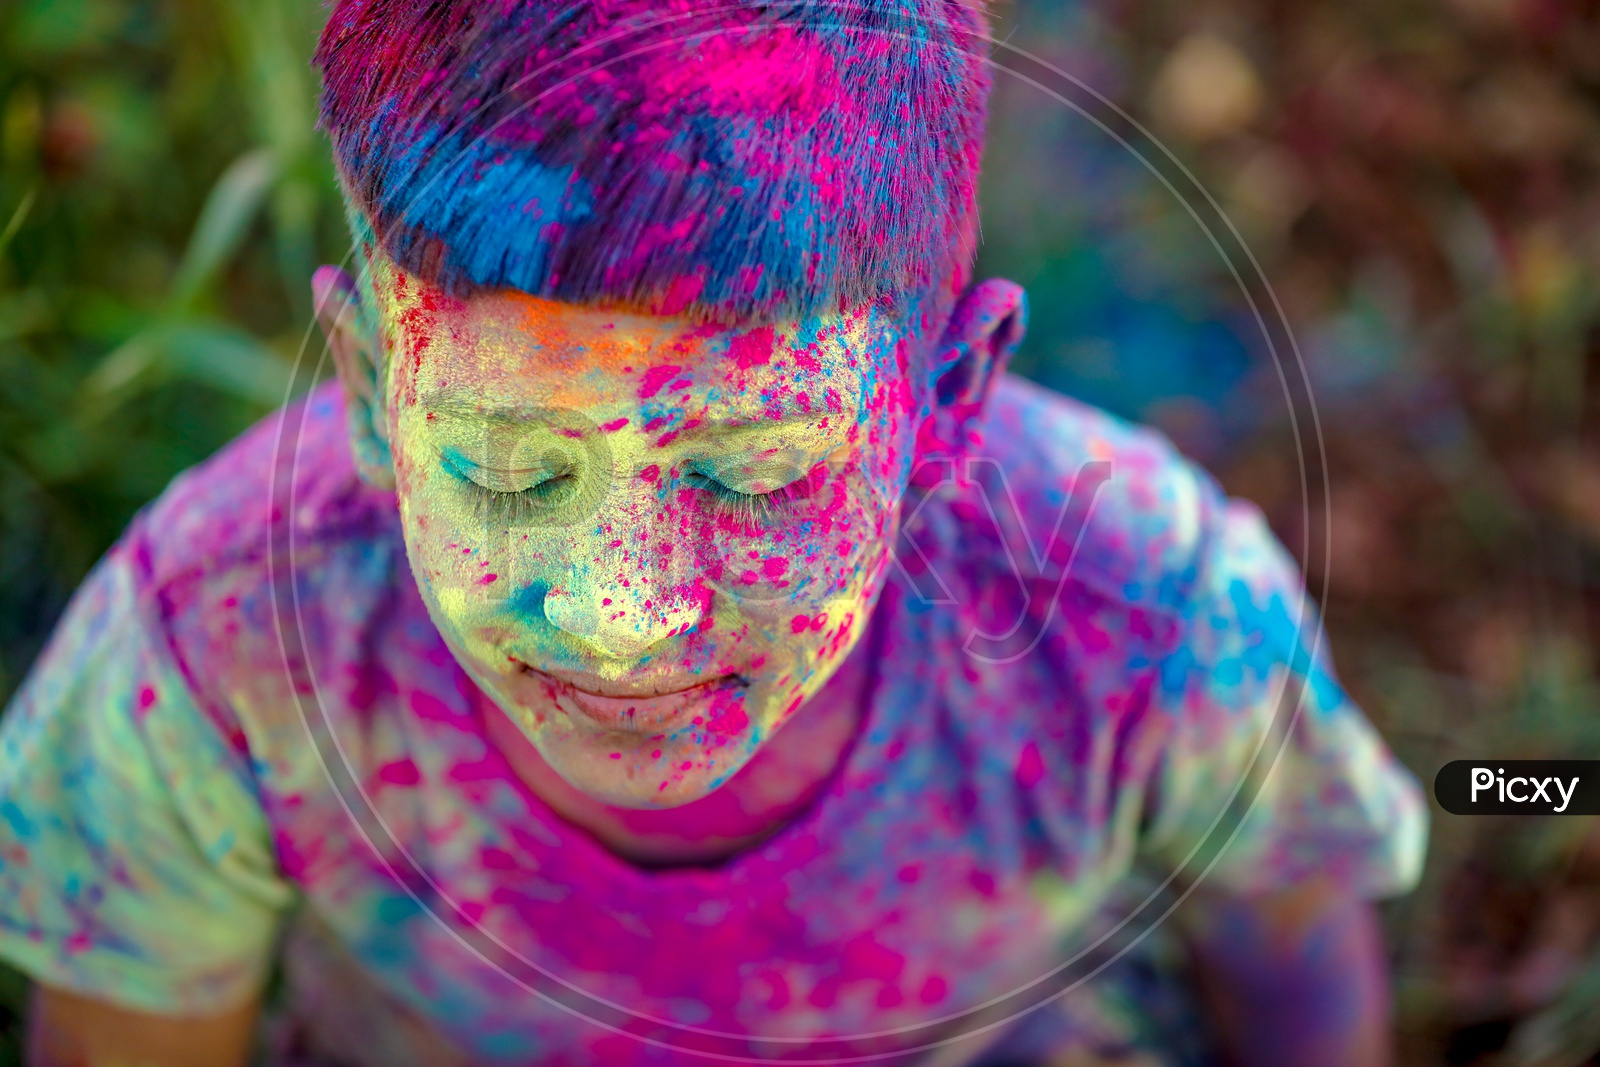 Indian Boy or Young Indian Boy  Playing Or Filled In Holi Colours Celebrating Holi Festival in Green Fields Background